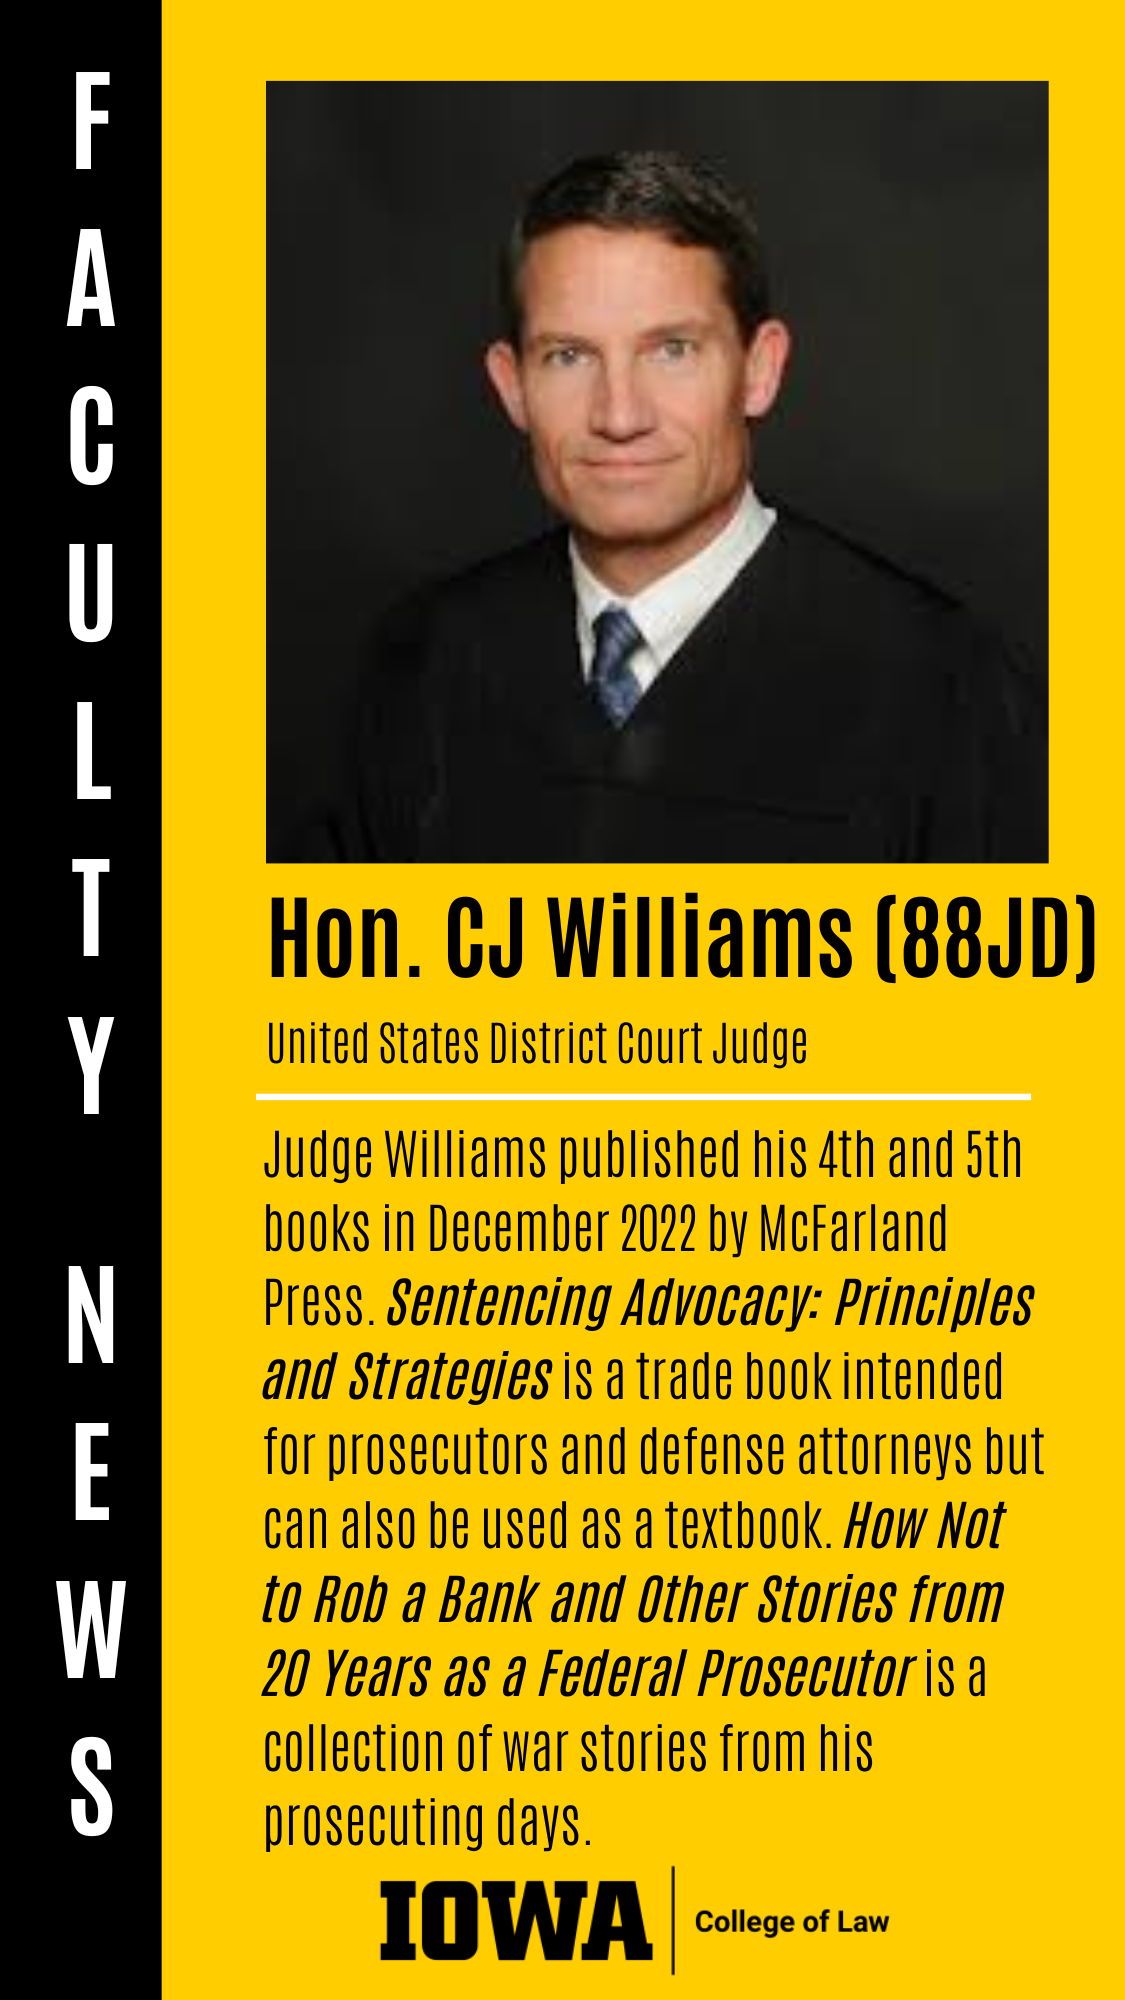 Hon. CJ Williams (88JD) United States District Court Judge Judge Williams published his 4th and 5th books in December 2022 by McFarland Press. Sentencing Advocacy: Principles and Strategies is a trade book intended for prosecutors and defense attorneys but can also be used as a textbook. How Not to Rob a Bank and Other Stories from 20 Years as a Federal Prosecutor is a collection of war stories from his prosecuting days.